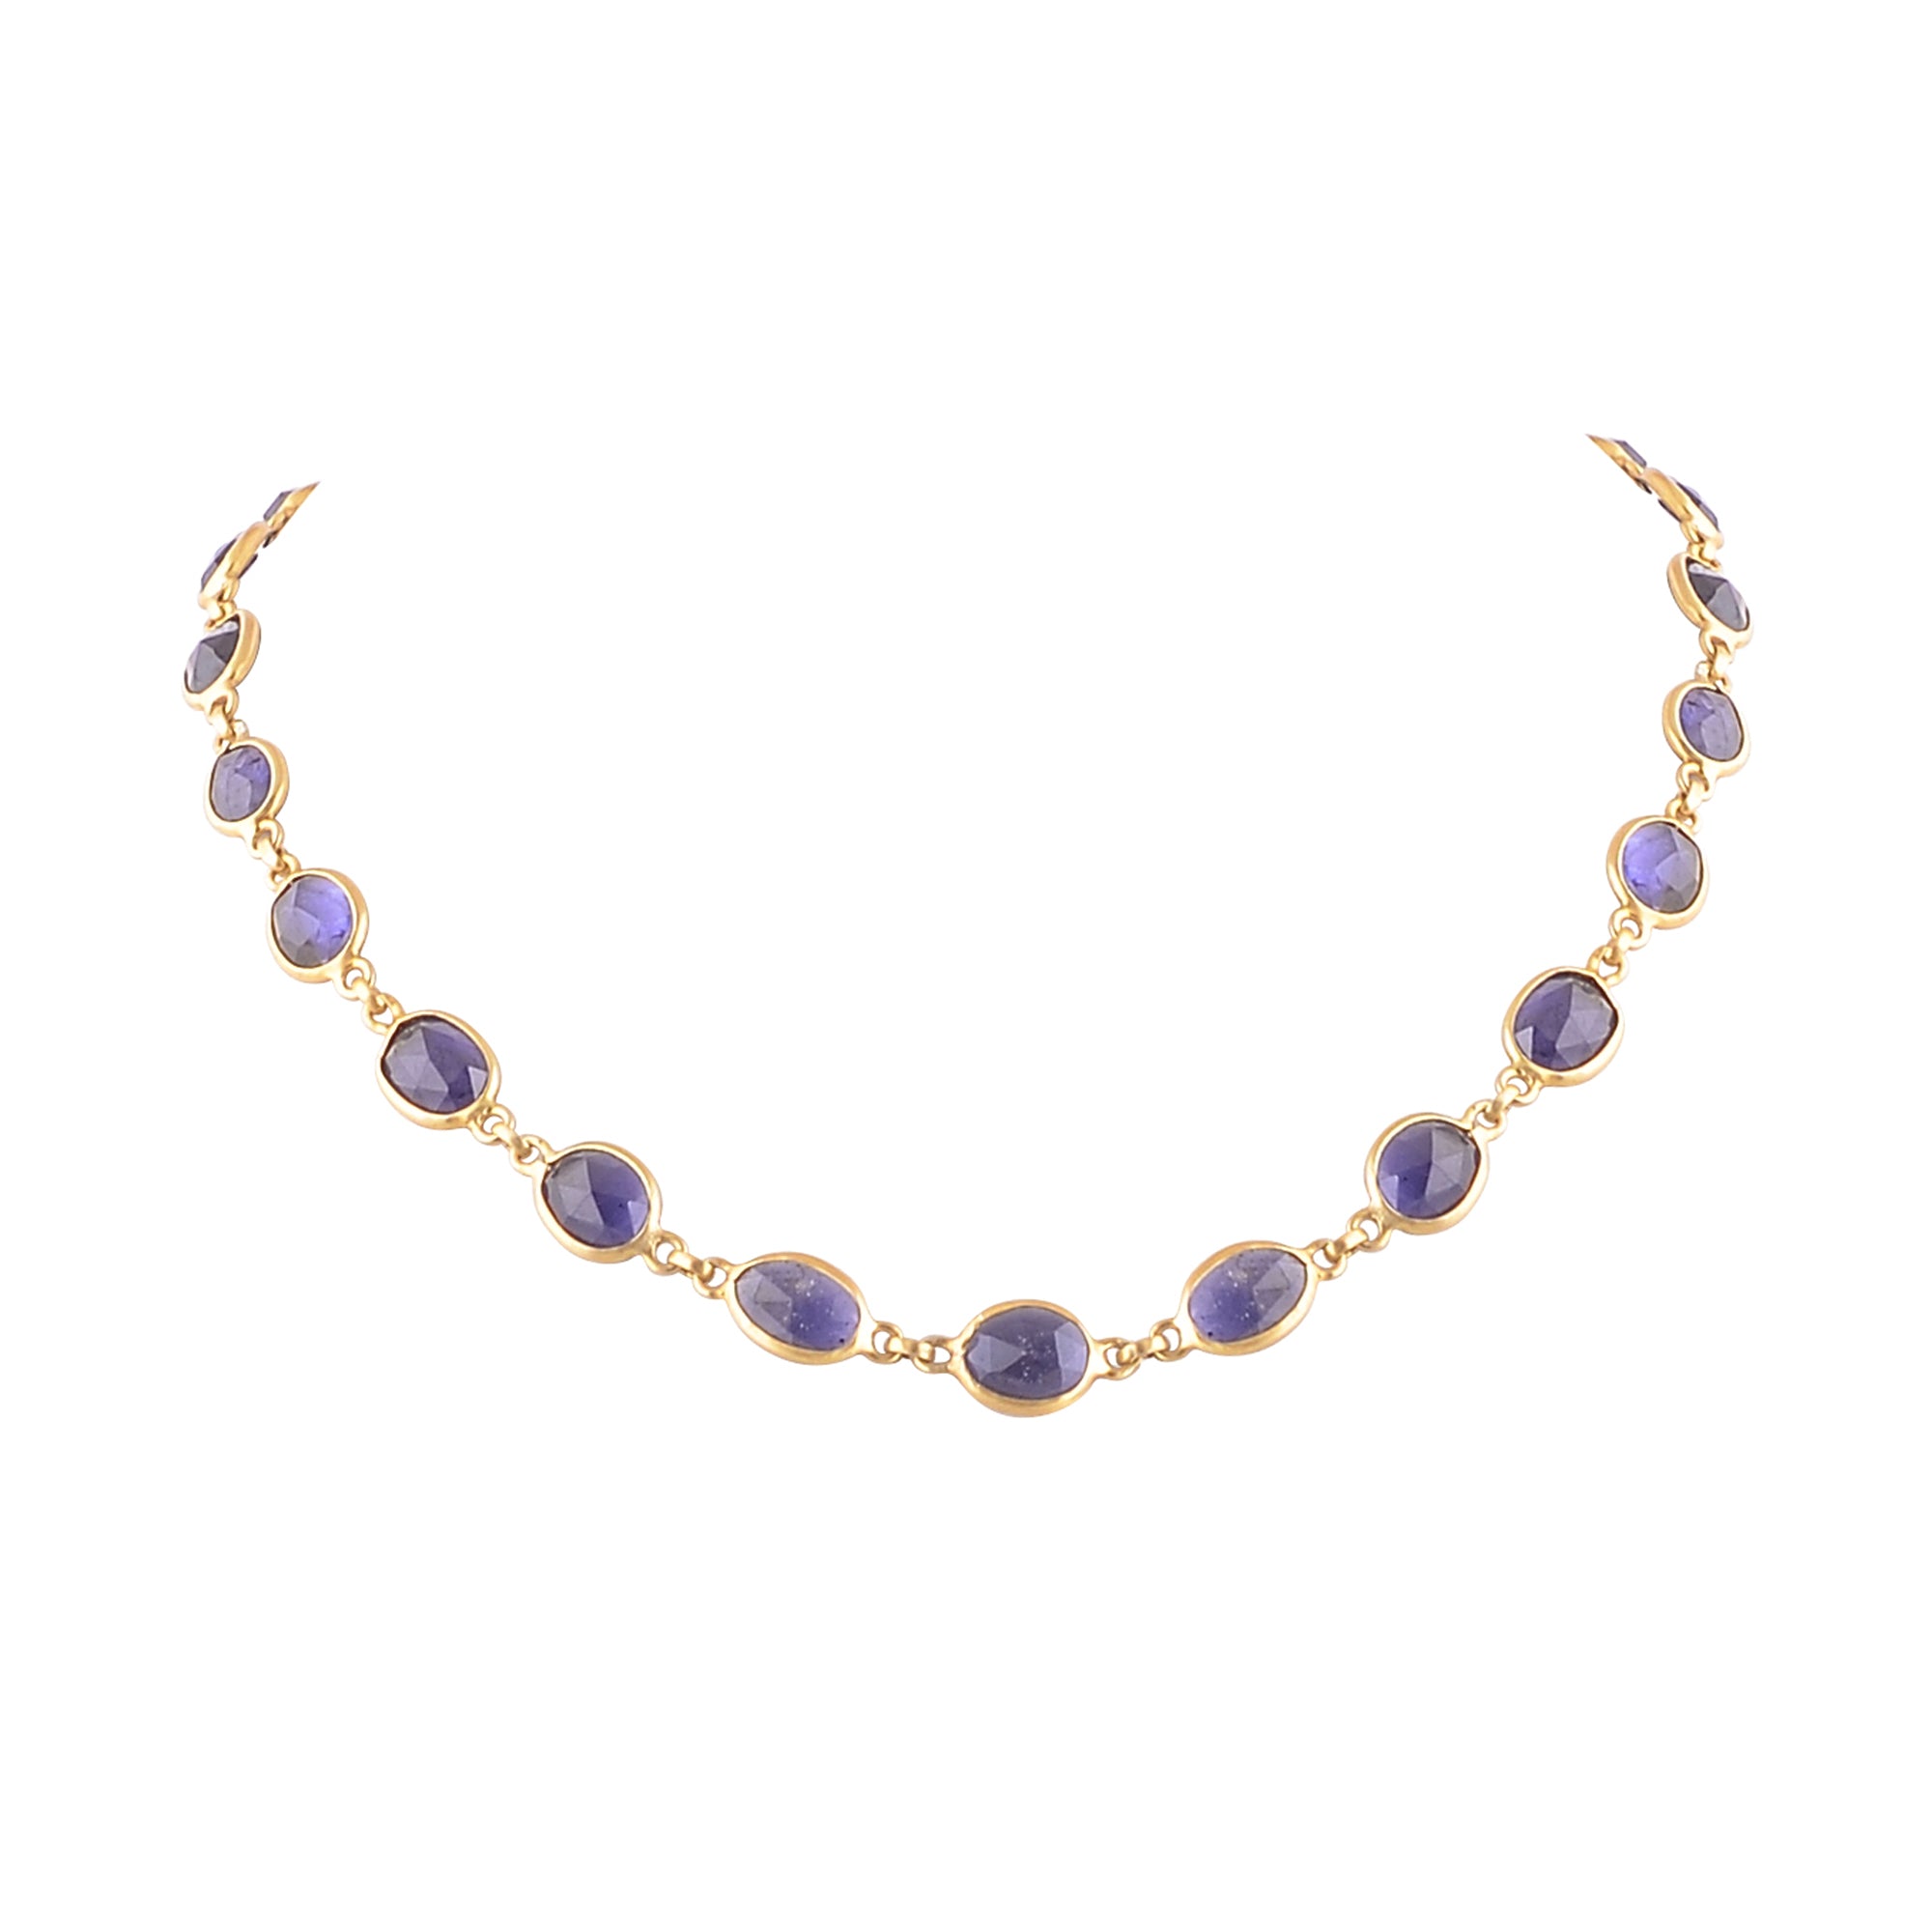 Buy Indian Handcrafted Silver Gold Plated Iolite Necklace